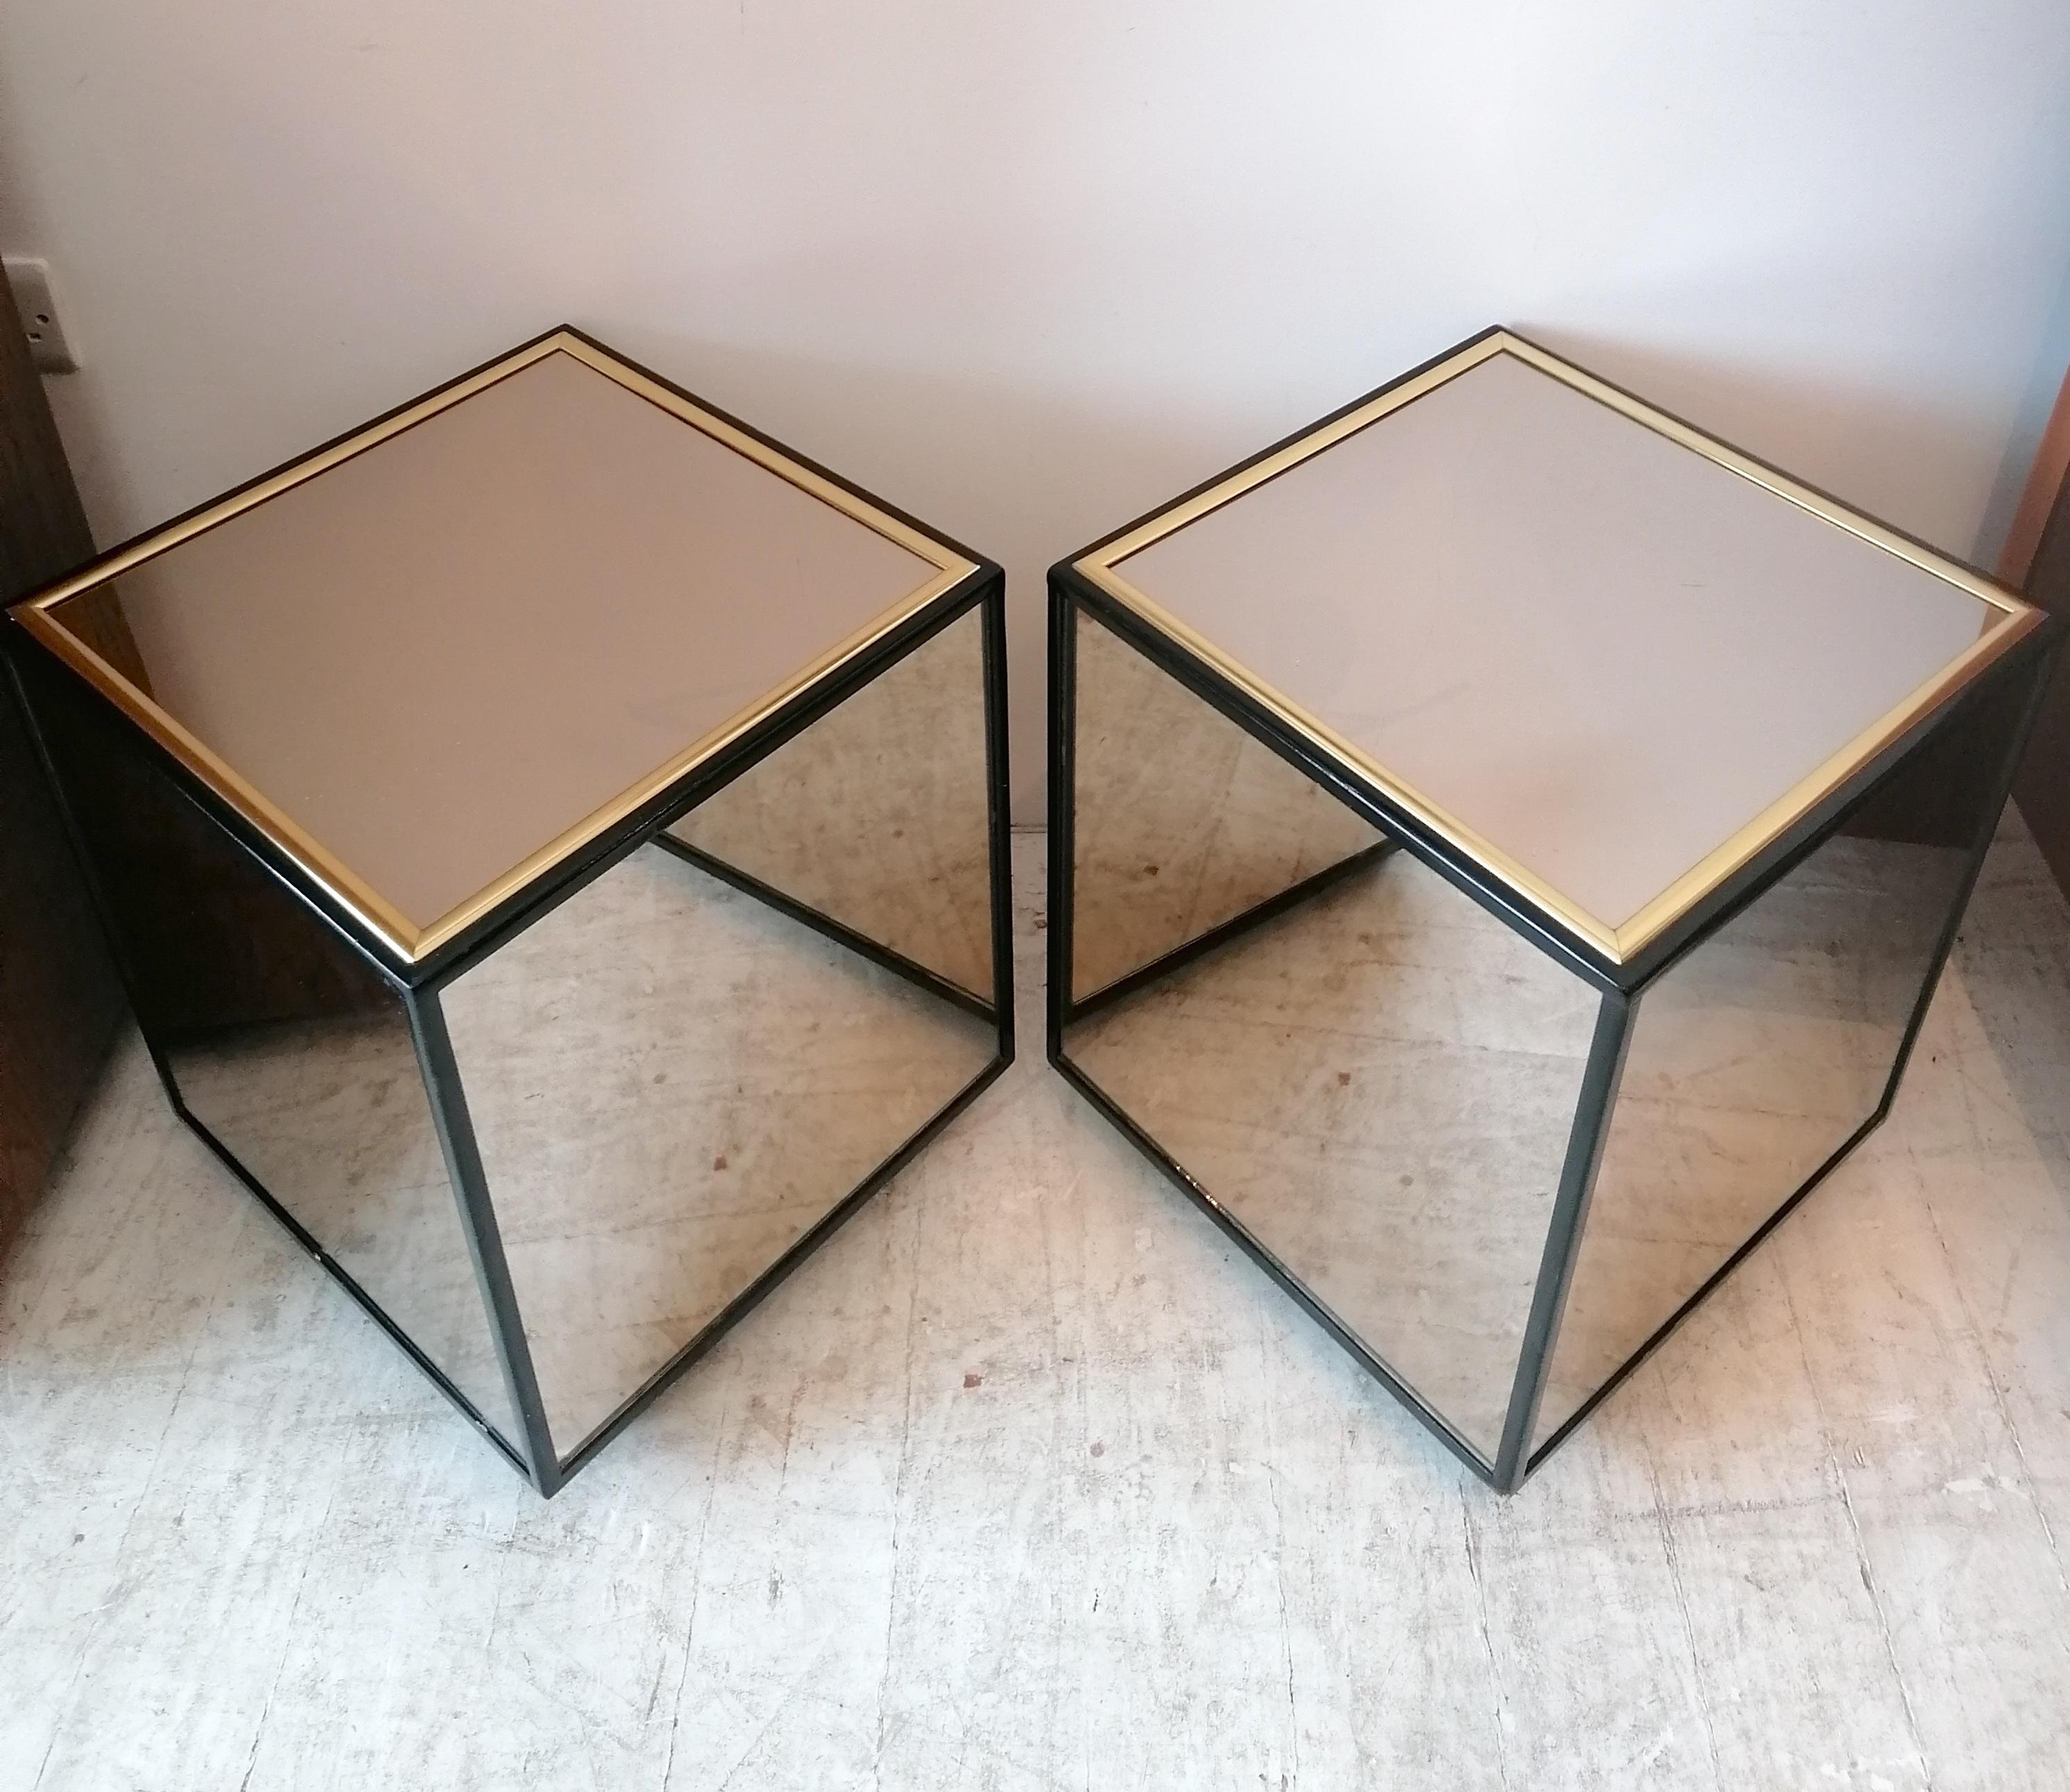 Pair of mirror cube side tables by Henredon, USA 1970s. Mirror glass panels, black lacquer frame, with gold metal detailing.
Great as bedside tables too.

Dimensions: width 40cm, depth 40cm, height 49cm
